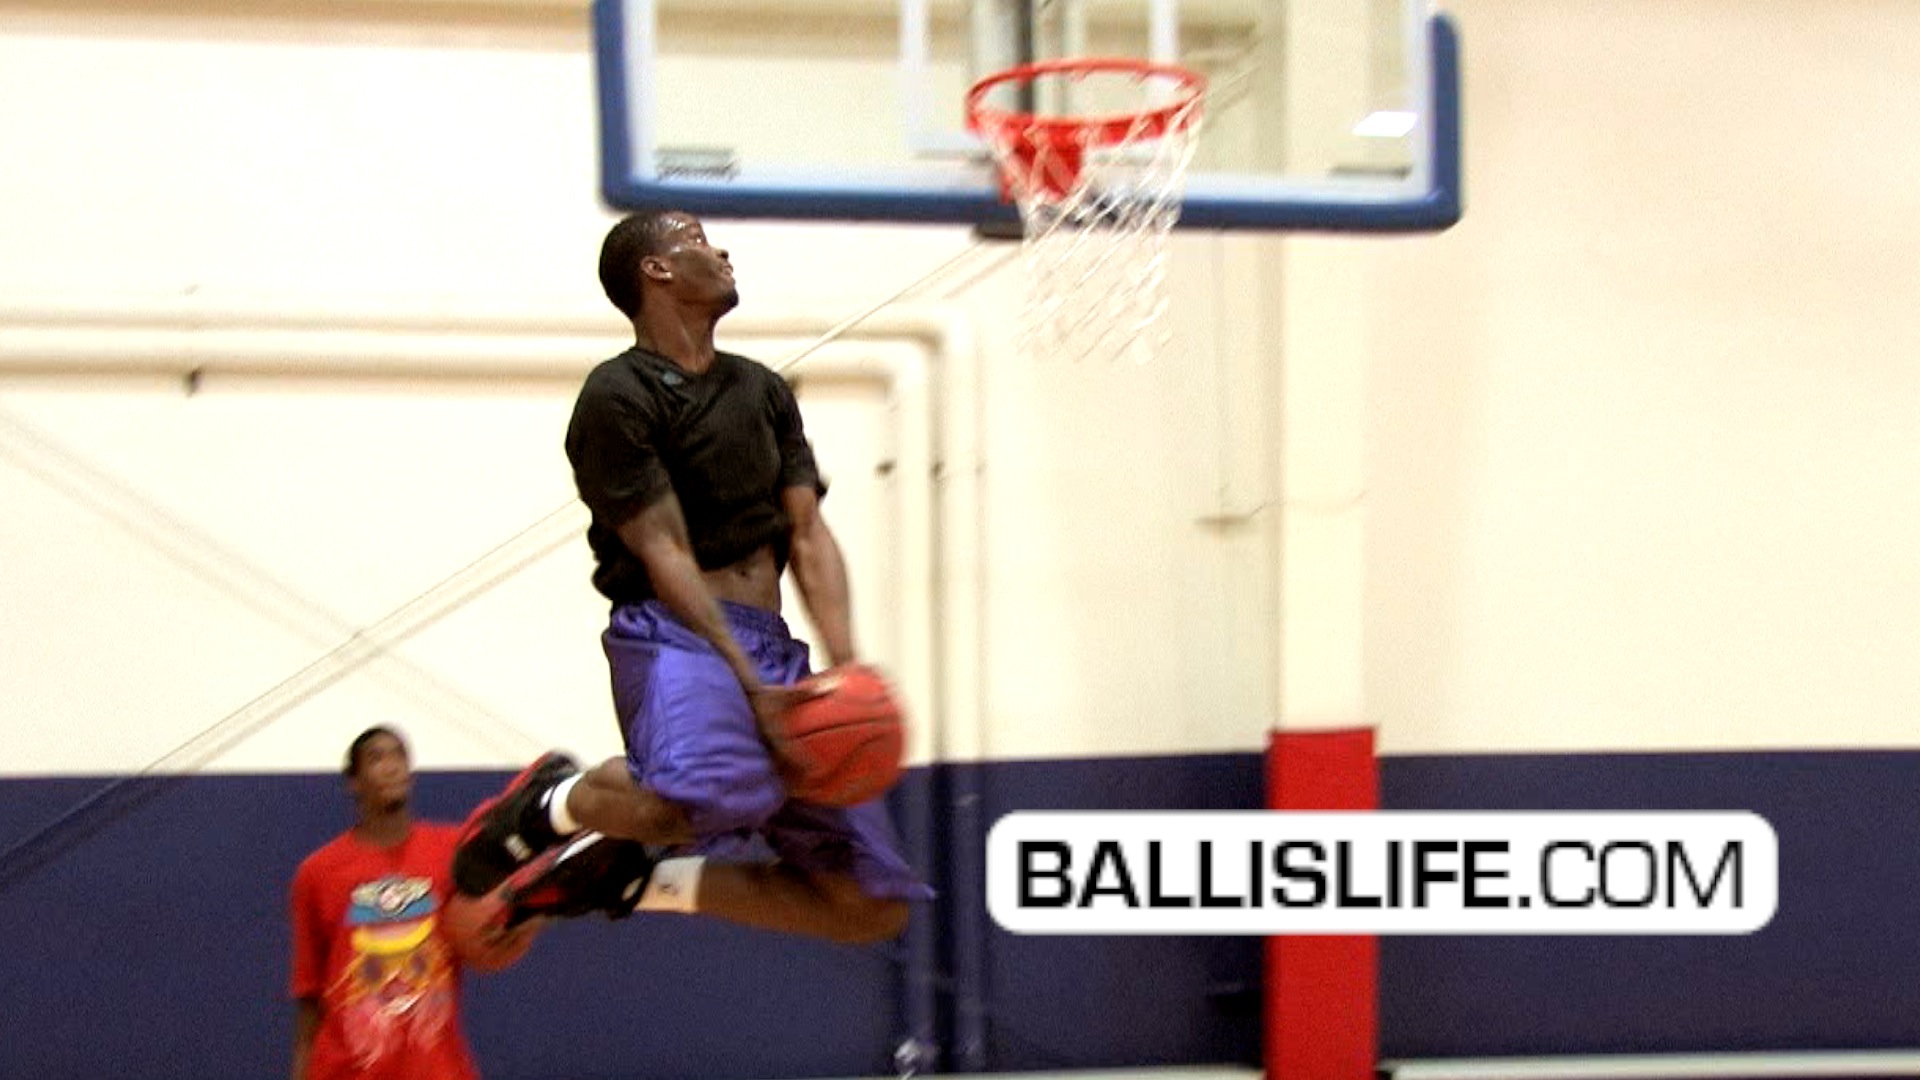 6'4″ Willie Warren With The Nasty Reverse Pump - Ball Is Life , HD Wallpaper & Backgrounds